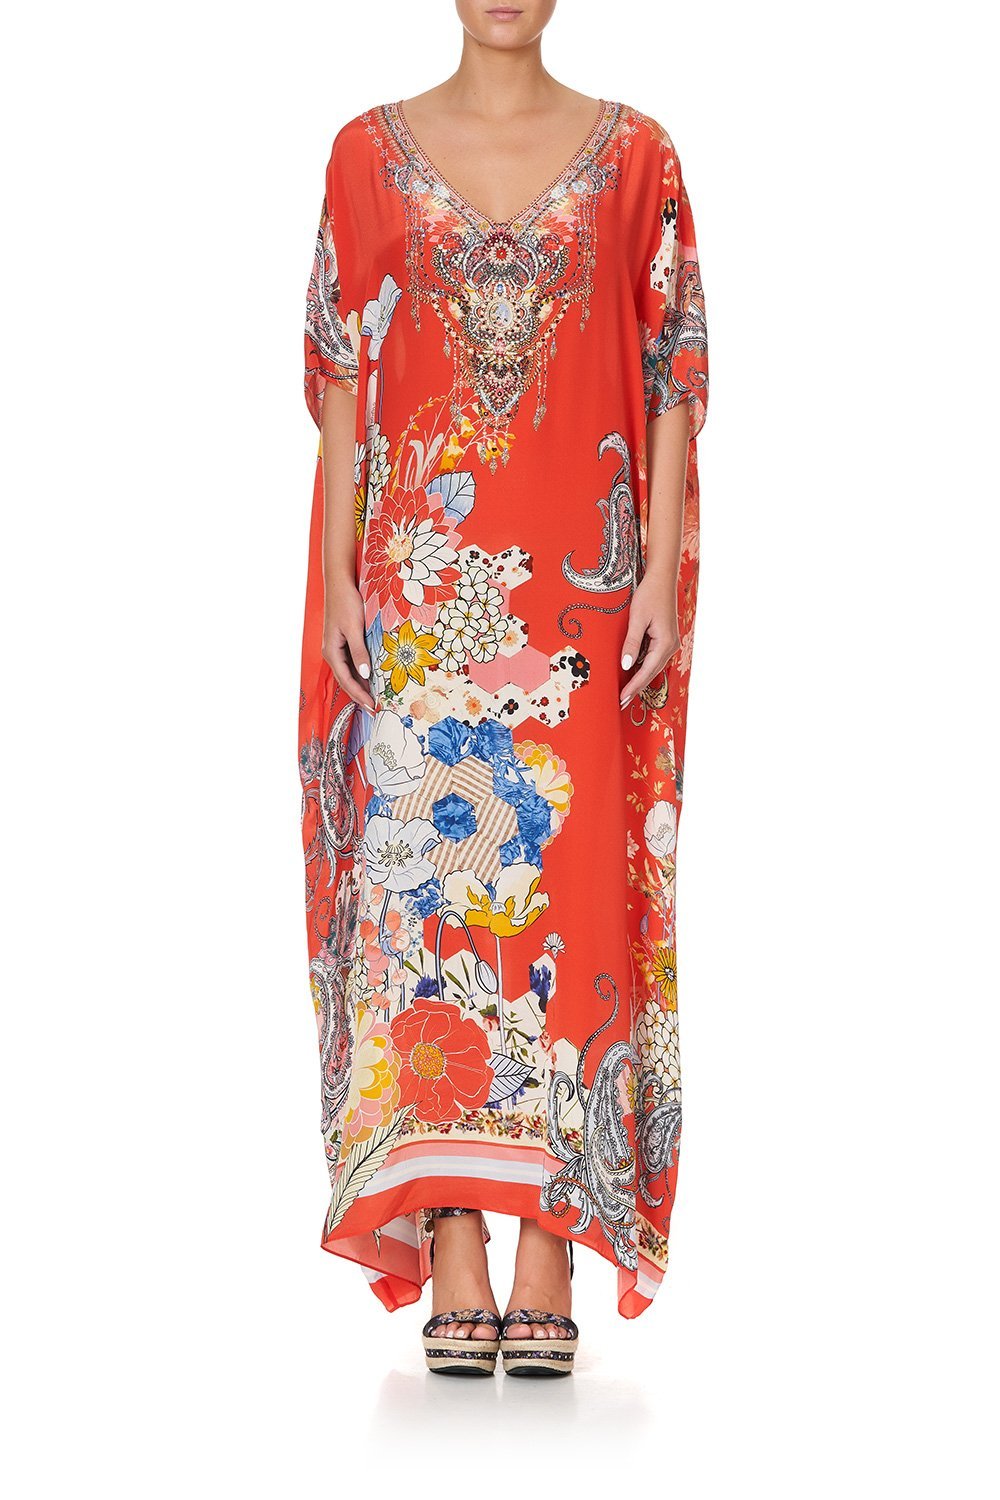 V-NECK KAFTAN PAISLEY IN PATCHES